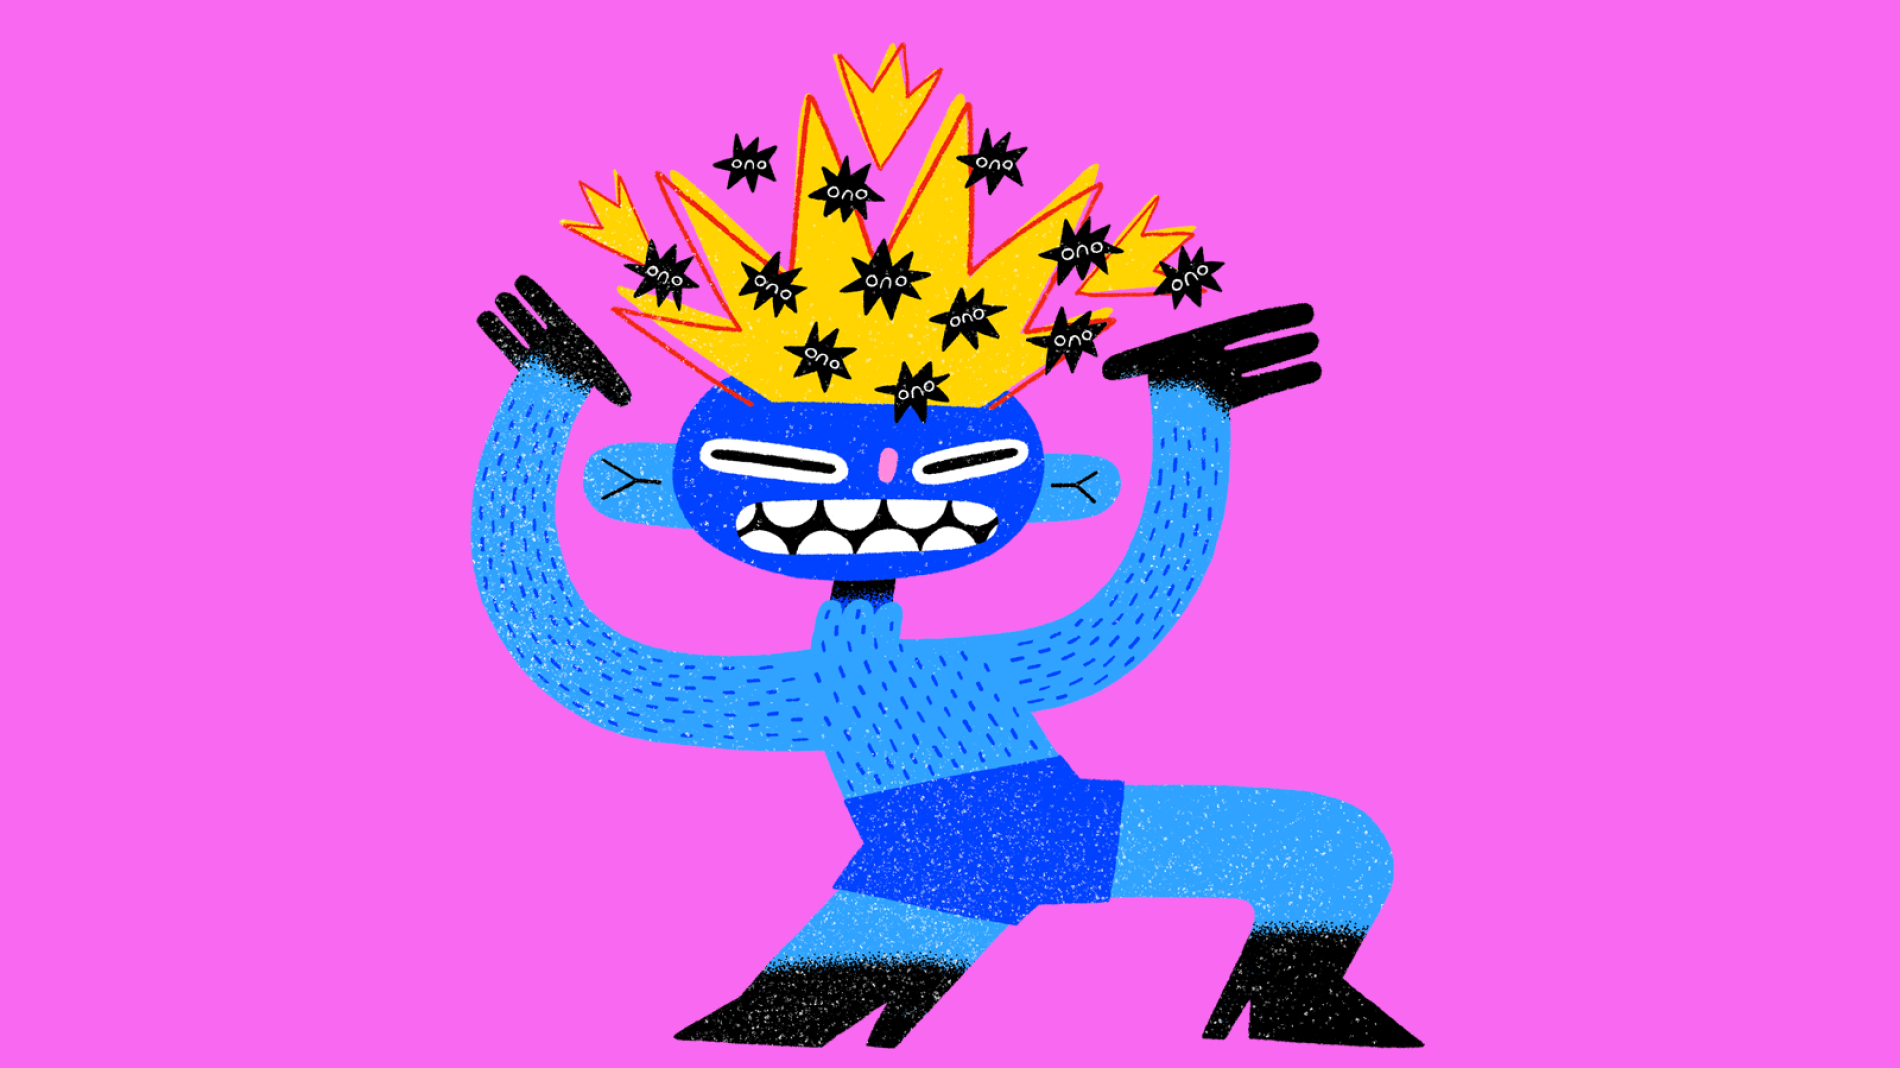 illustrated character with sparks and stars exploding from their head